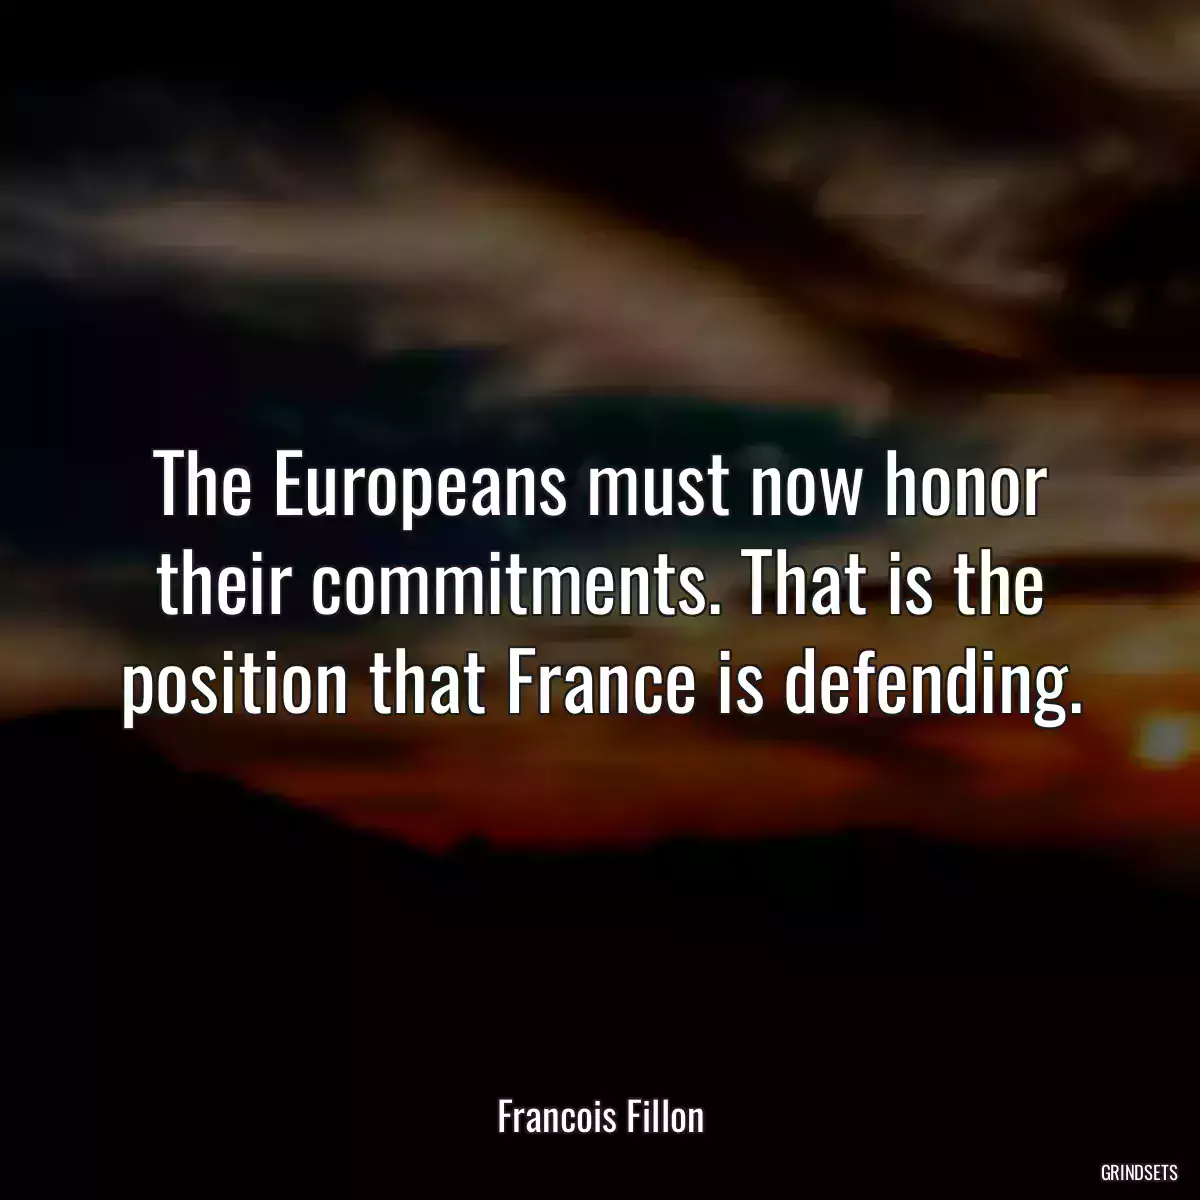 The Europeans must now honor their commitments. That is the position that France is defending.